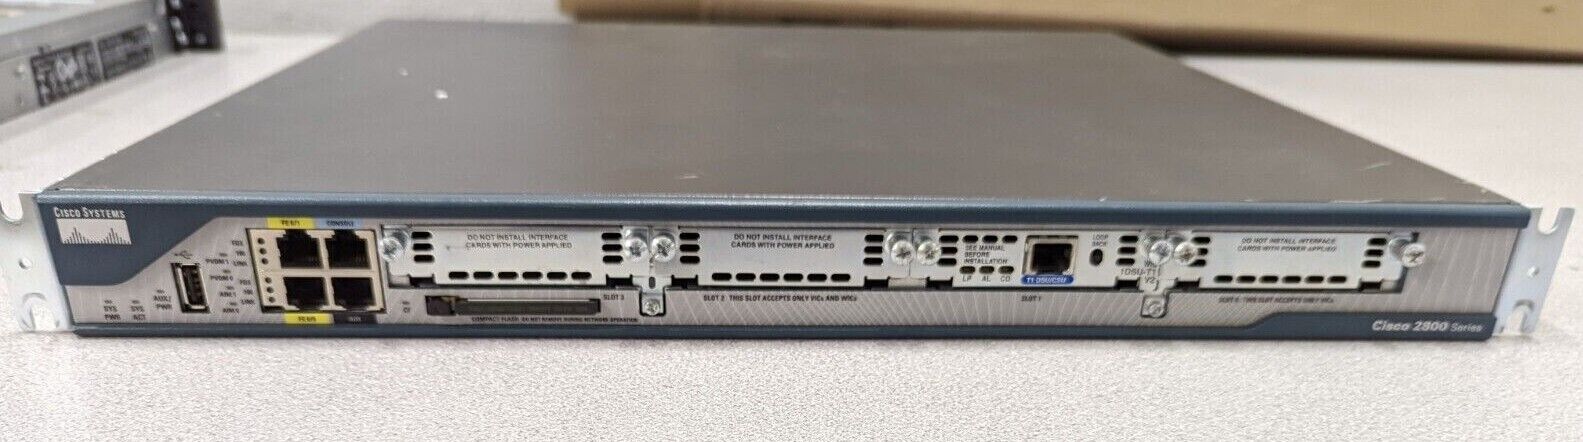 2801 Integrated Services Router w/AC & PE - Cisco Community